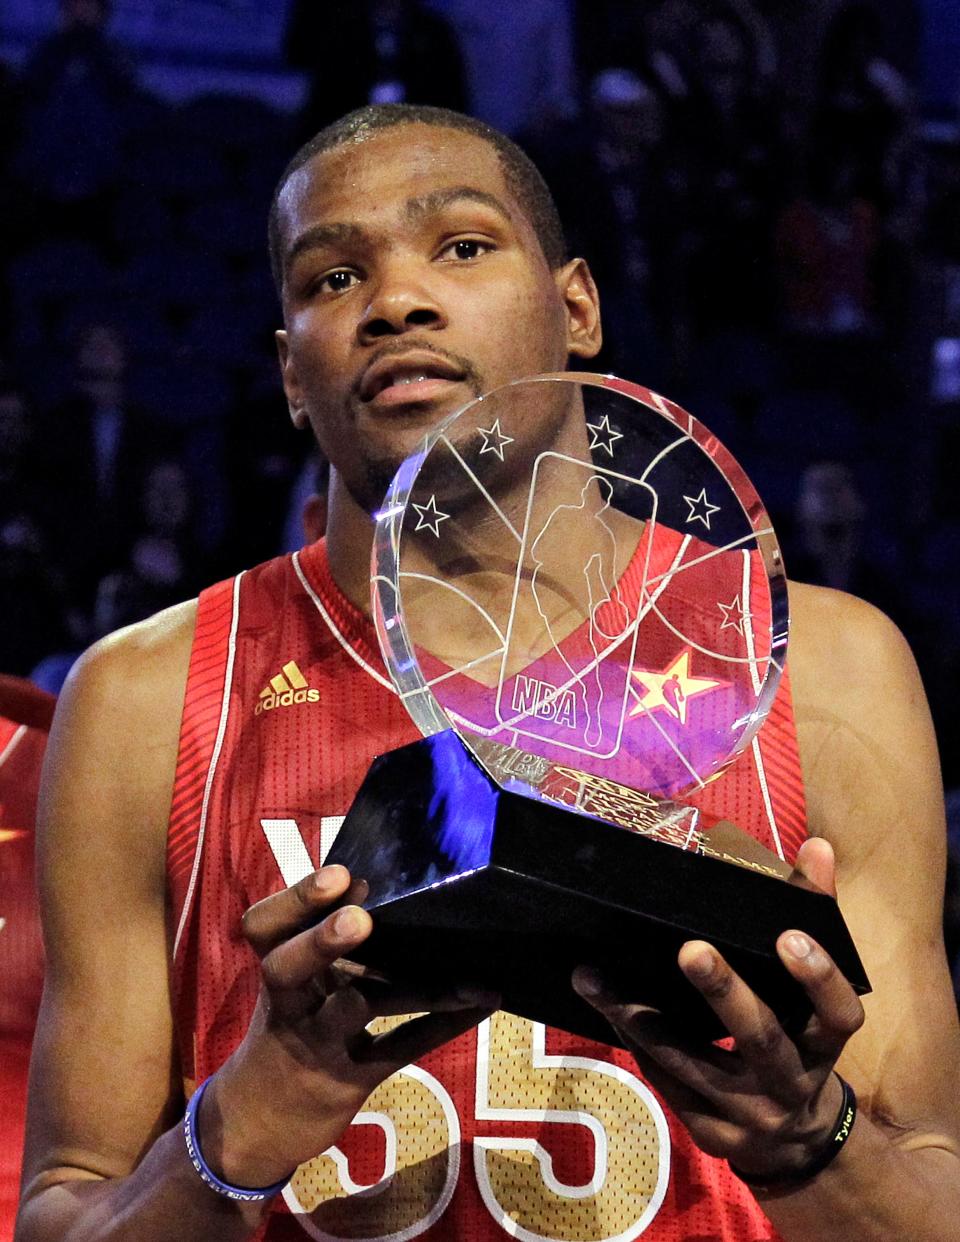 Western Conference's Kevin Durant, of the Oklahoma City Thunder, hoists the Most Valuable Player trophy following the NBA All-Star basketball game, Sunday, Feb. 26, 2012, in Orlando, Fla. The Western Conference won 152-149. (AP Photo/Chris O'Meara) ORG XMIT: DOA153